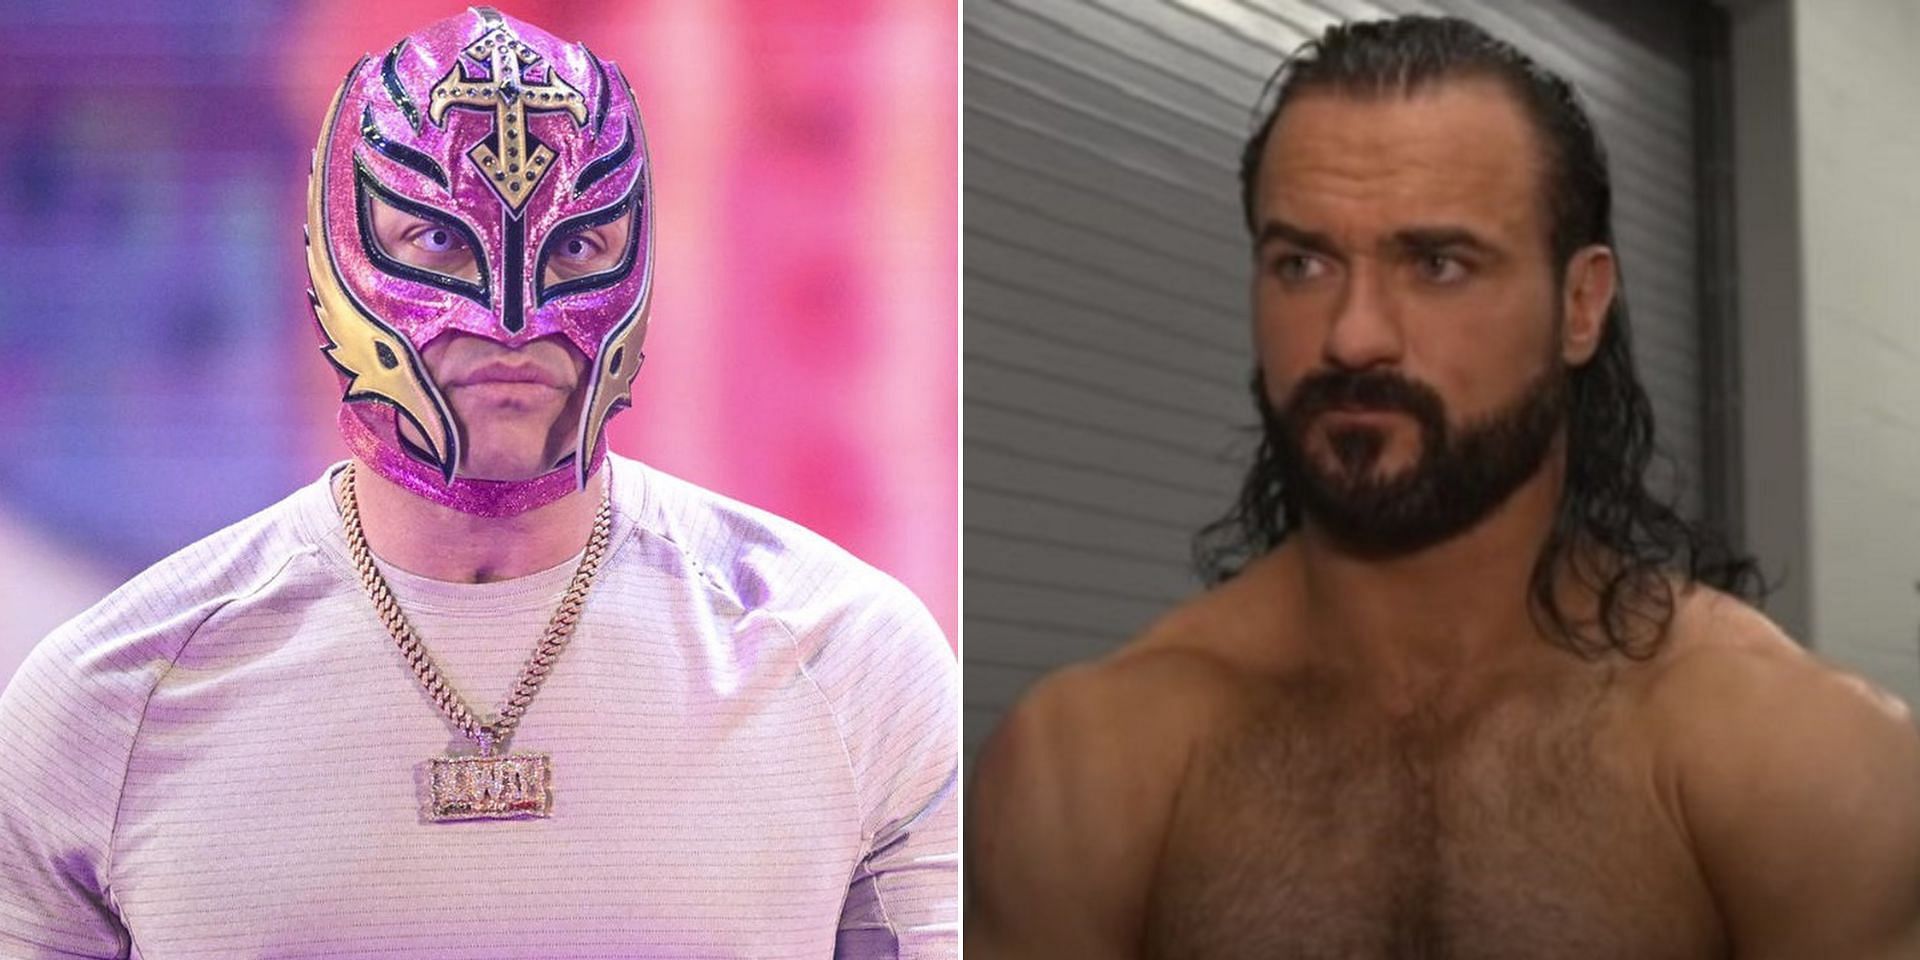 A current star wants to face Drew McIntyre and Rey Mysterio again